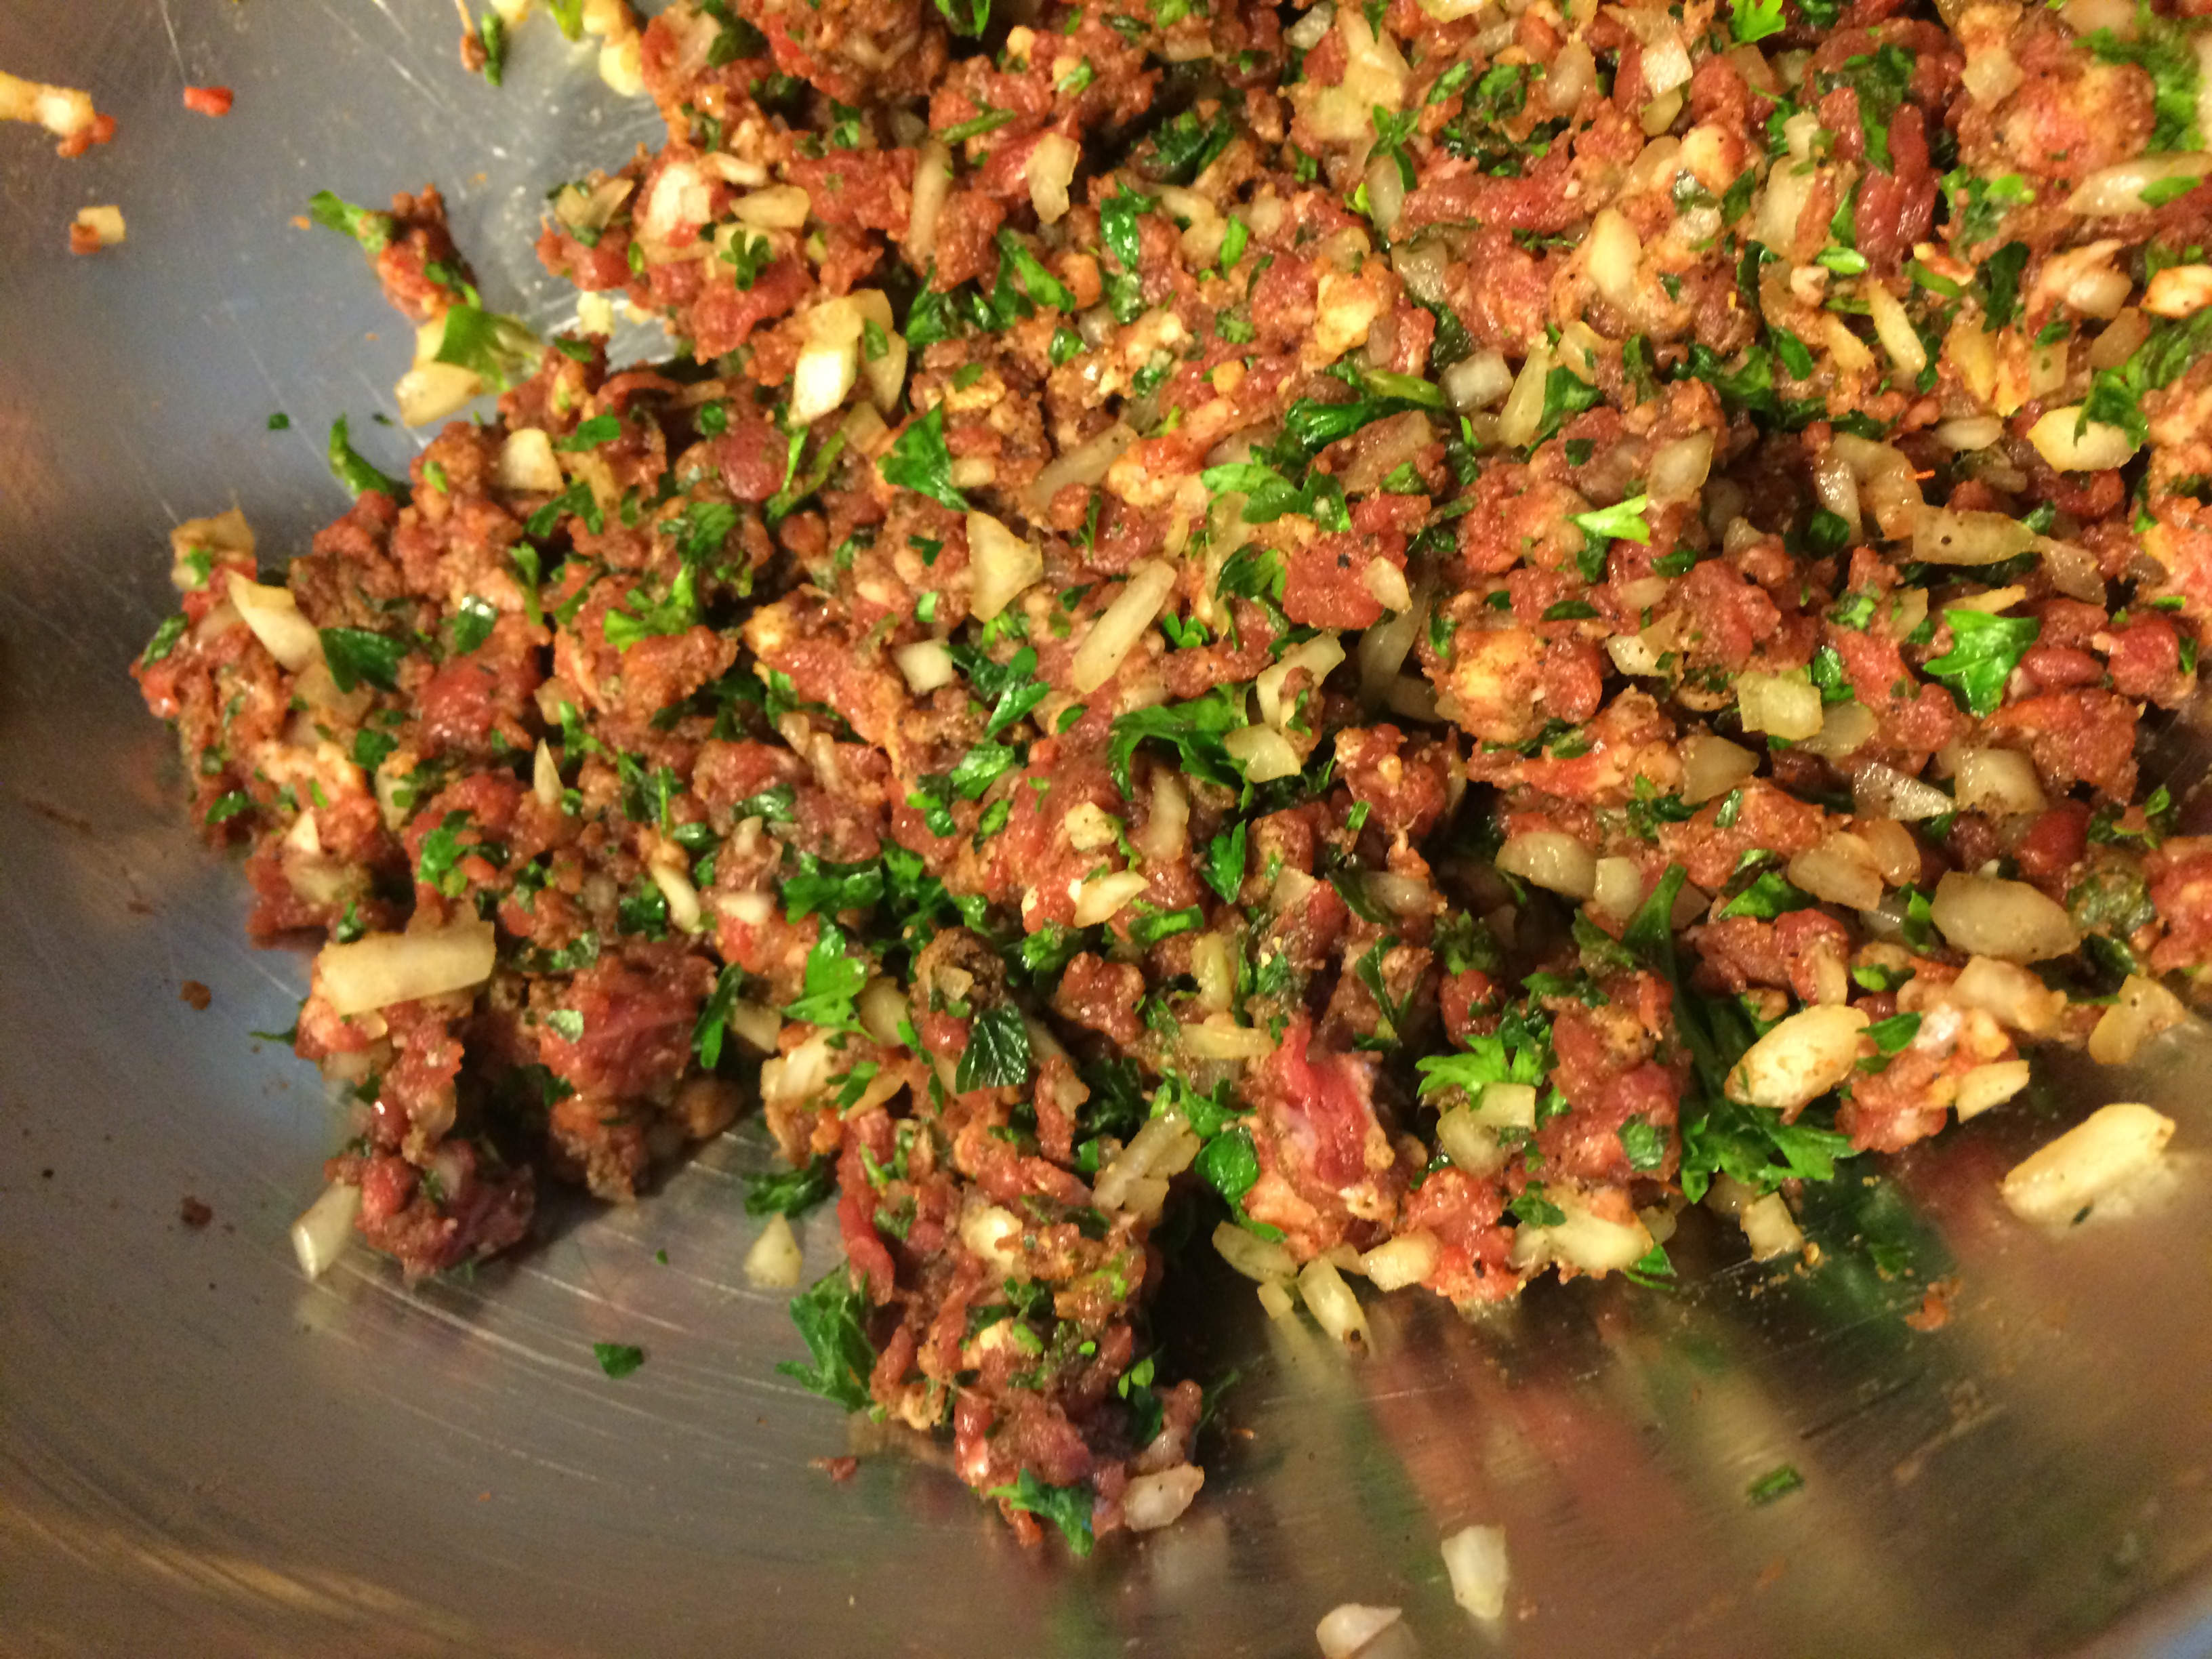 Coarse ground beef, mixed with parsley, spices, and onions